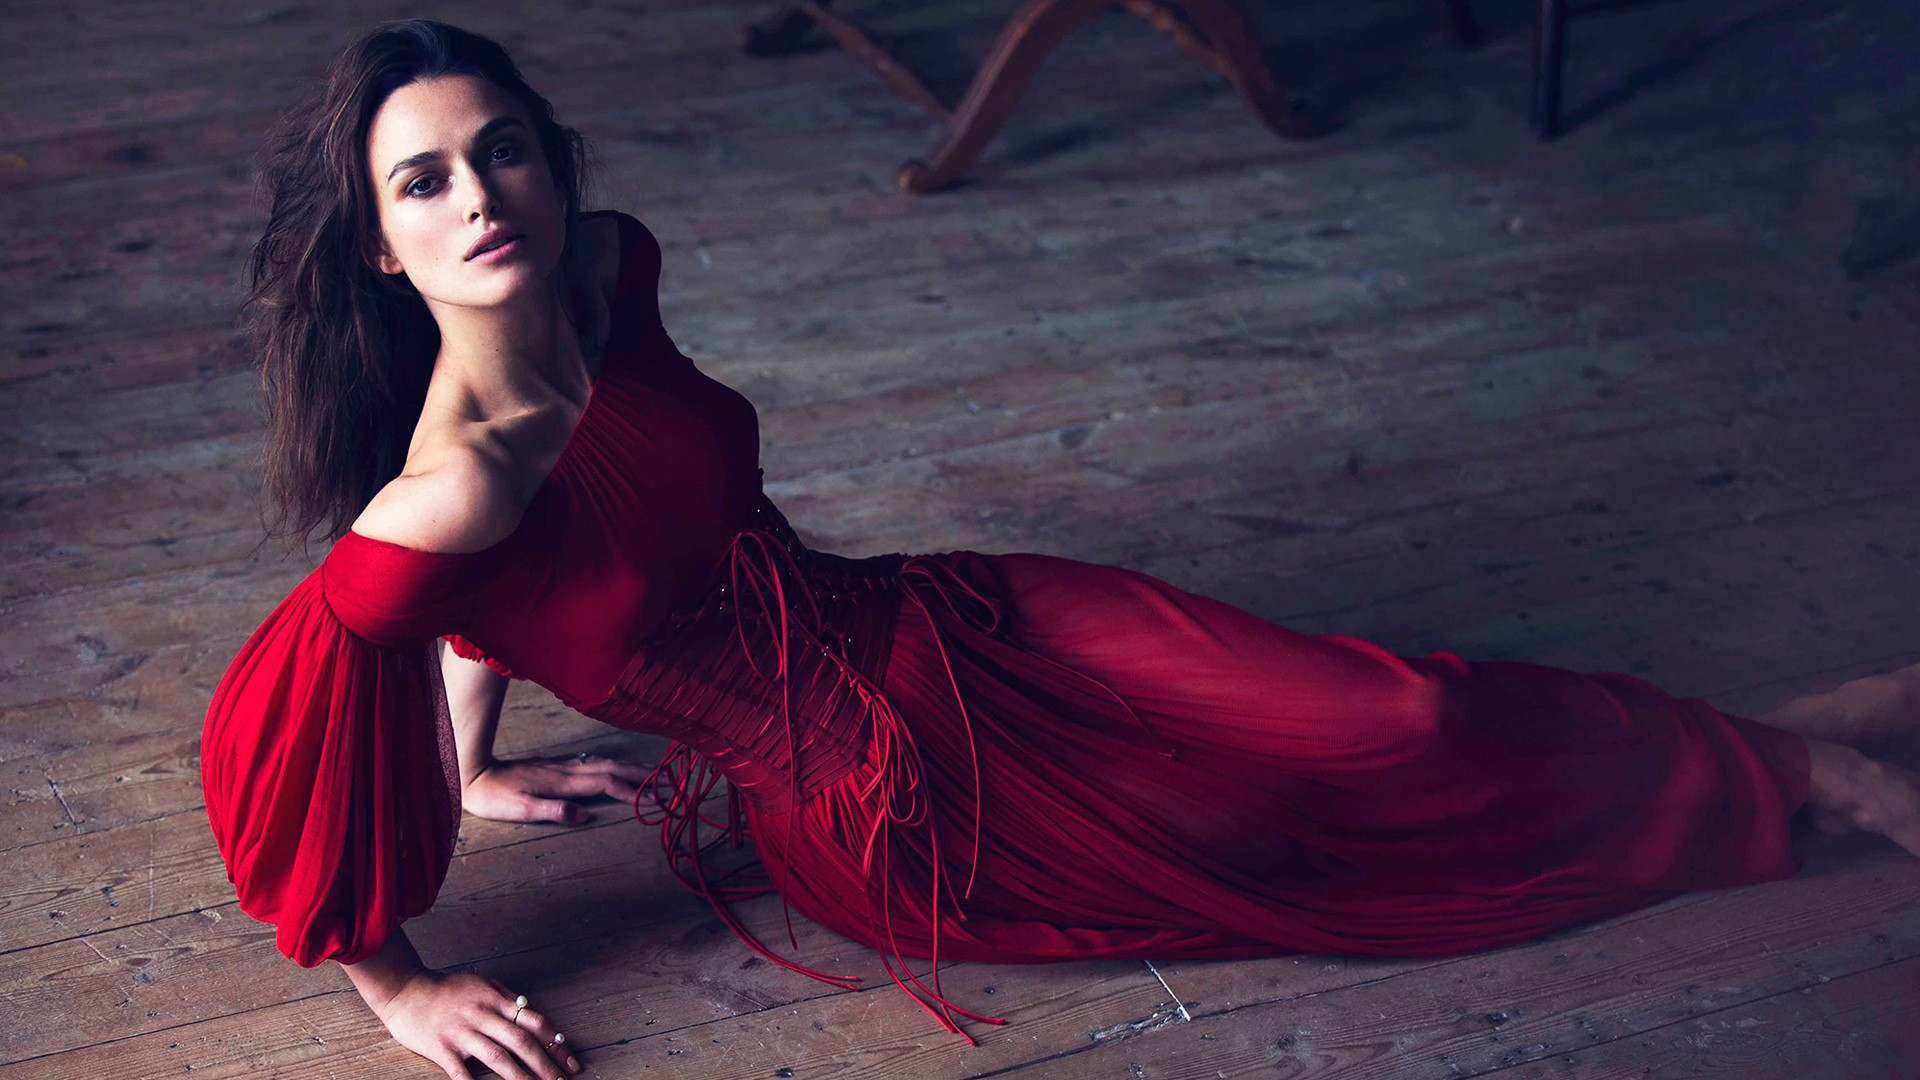 keira knightley hd wallpapers,fashion model,red,clothing,dress,beauty